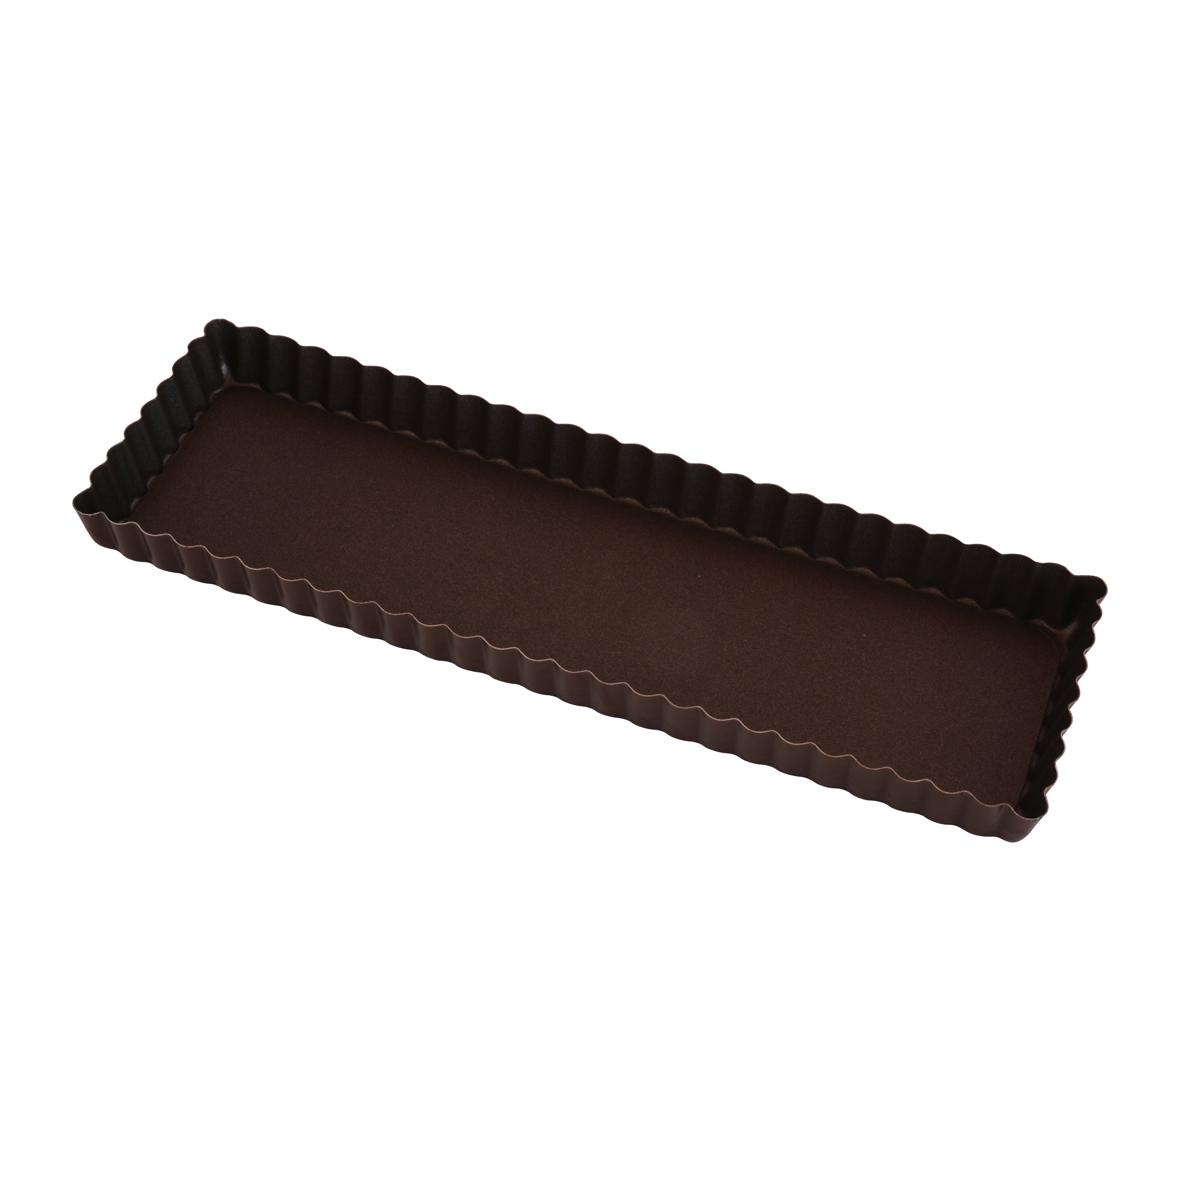 Moule a tarte rectangulaire fond fixe anti-adherent - ustensiles a patisserie - gobel